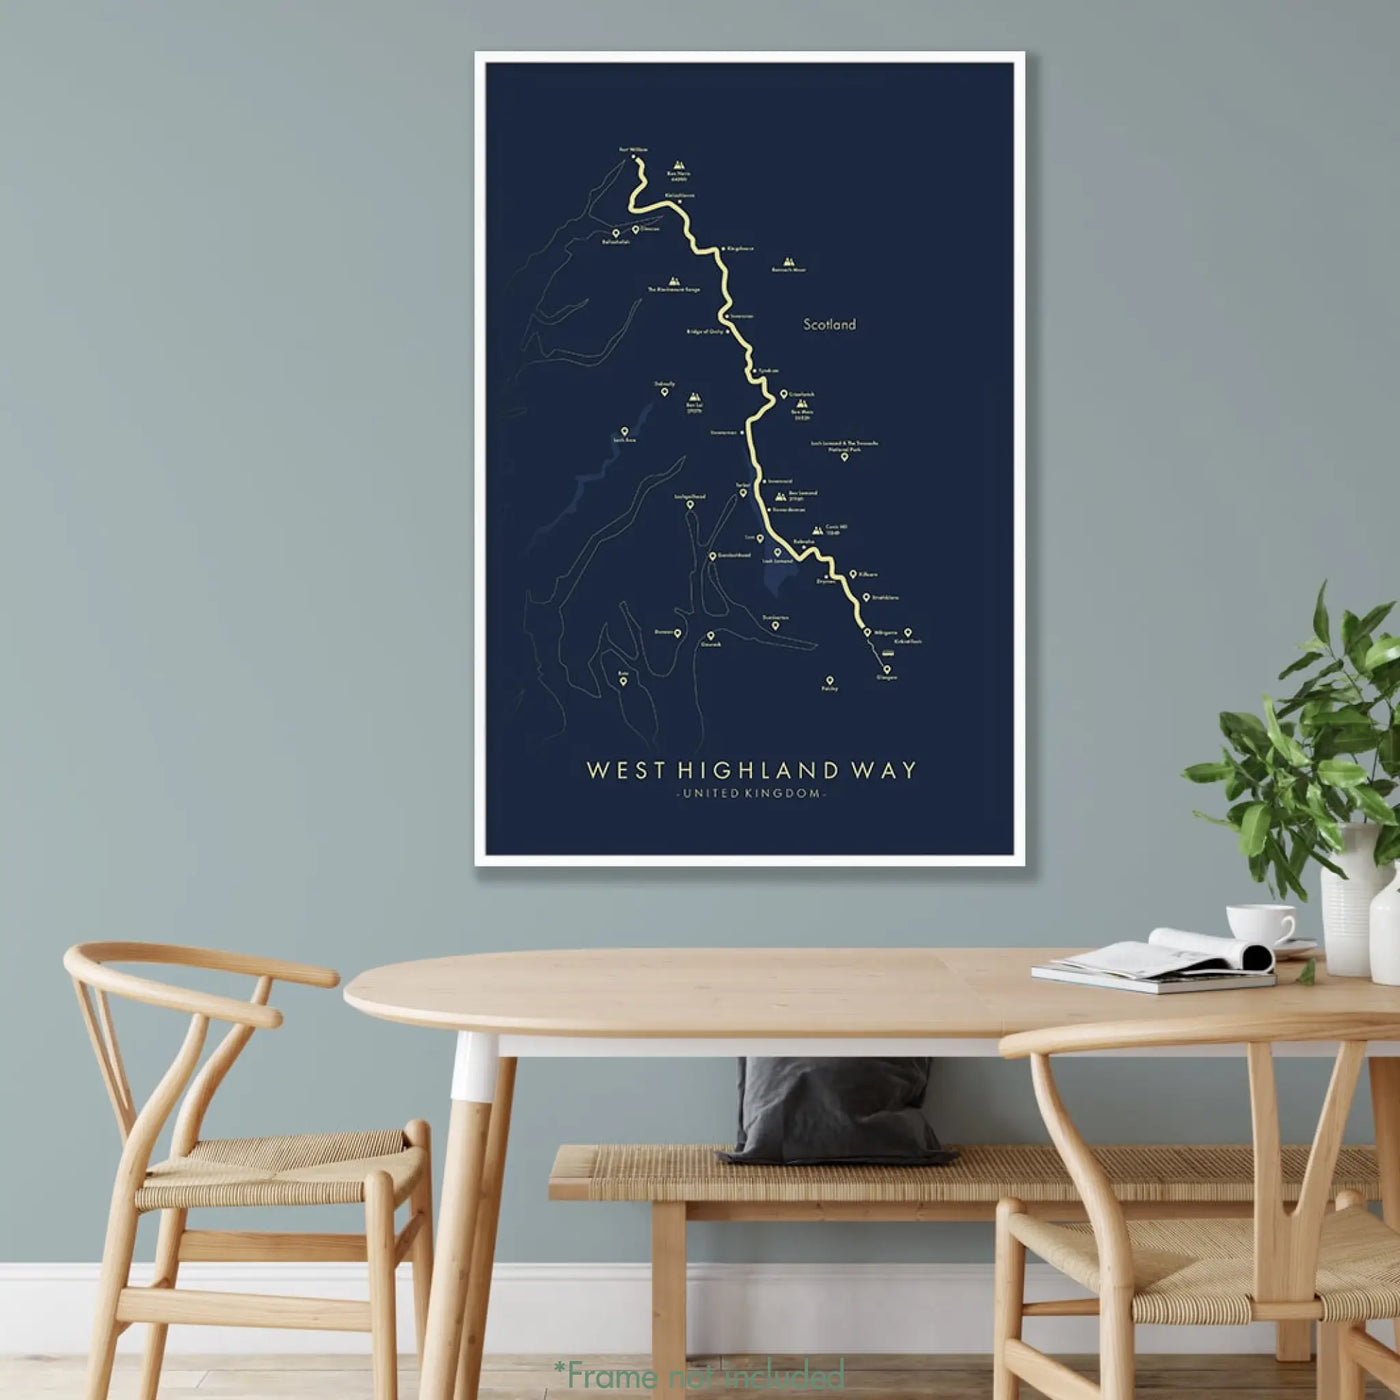 Trail Poster of West Highland Way - Blue Mockup